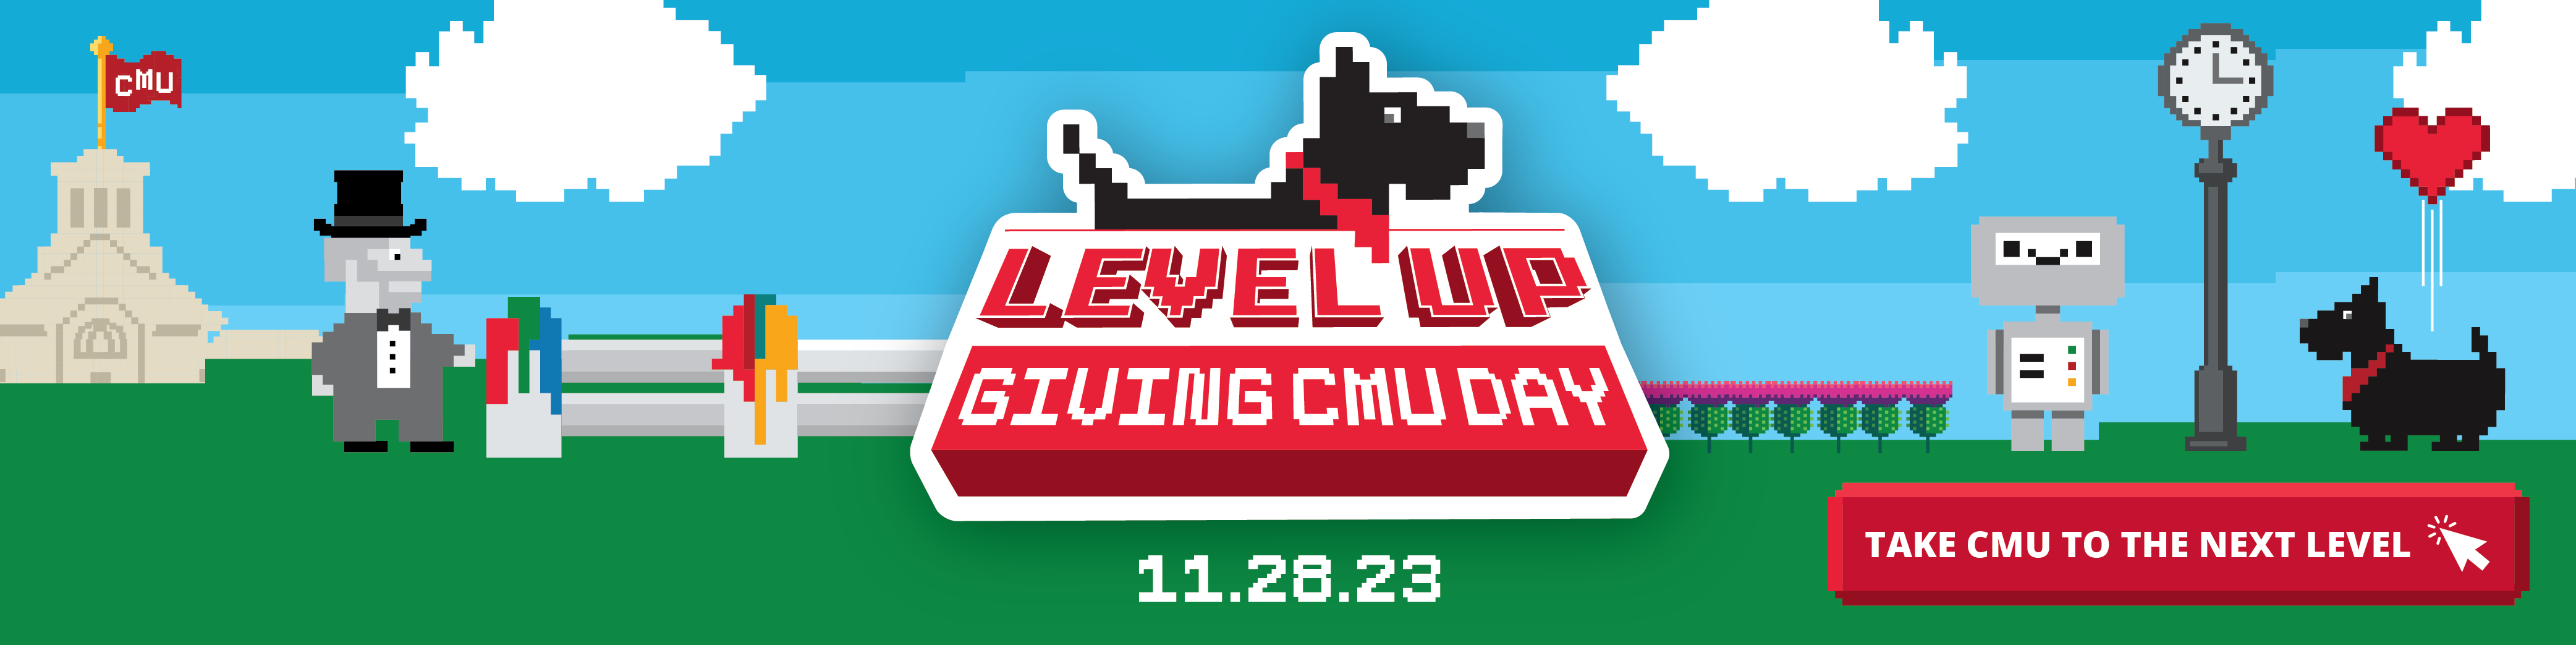 8Bit gaming logo for Giving CMU Day that reads Level Up: Giving CMU Day, 11/28/23, Take CMU to the next level.